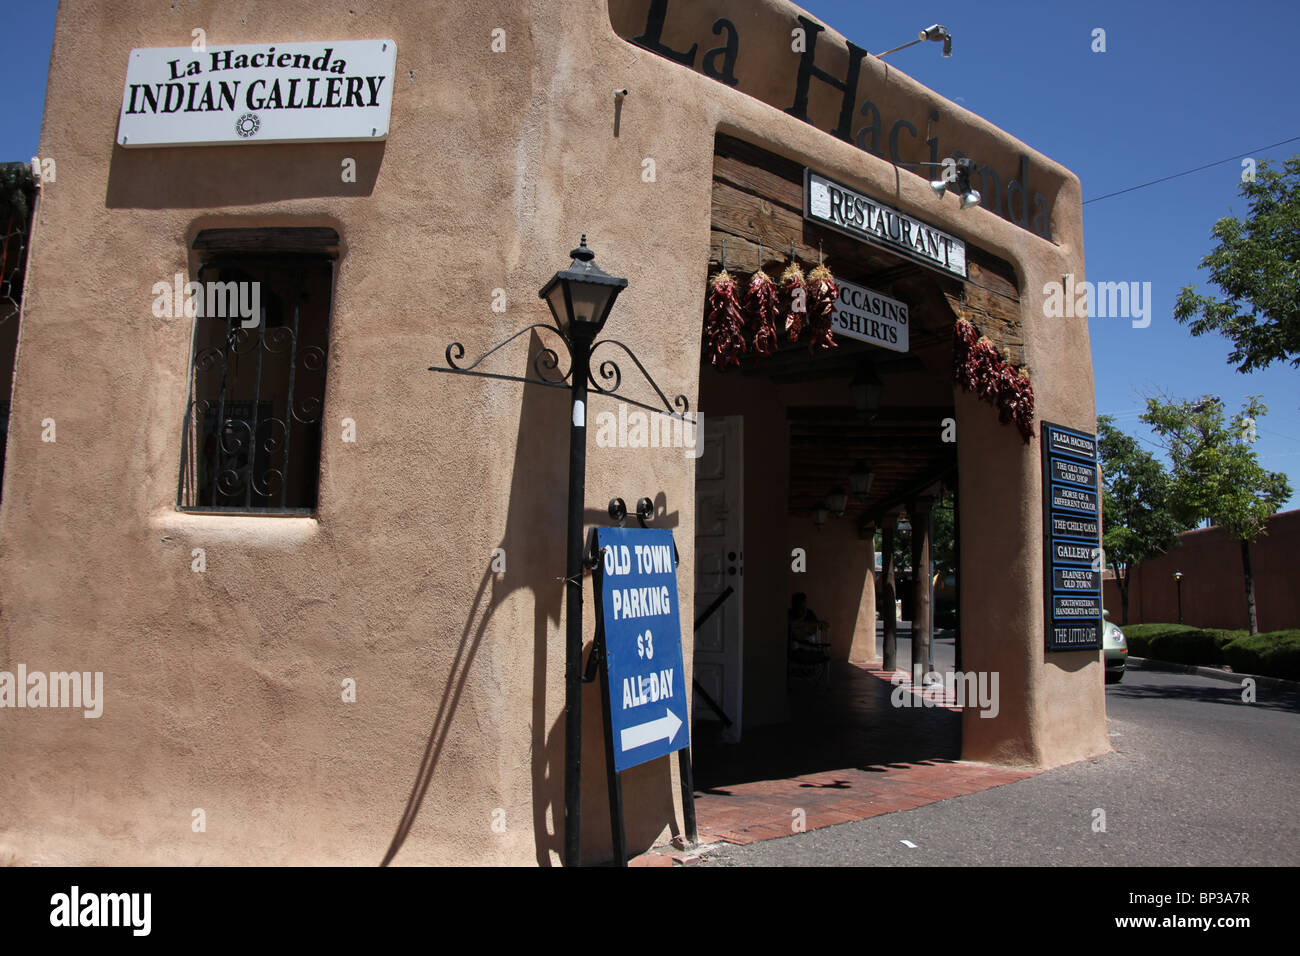 Art gallery and restaurant in Old Town Albuquerque, New Mexico, June 17, 2010 Stock Photo